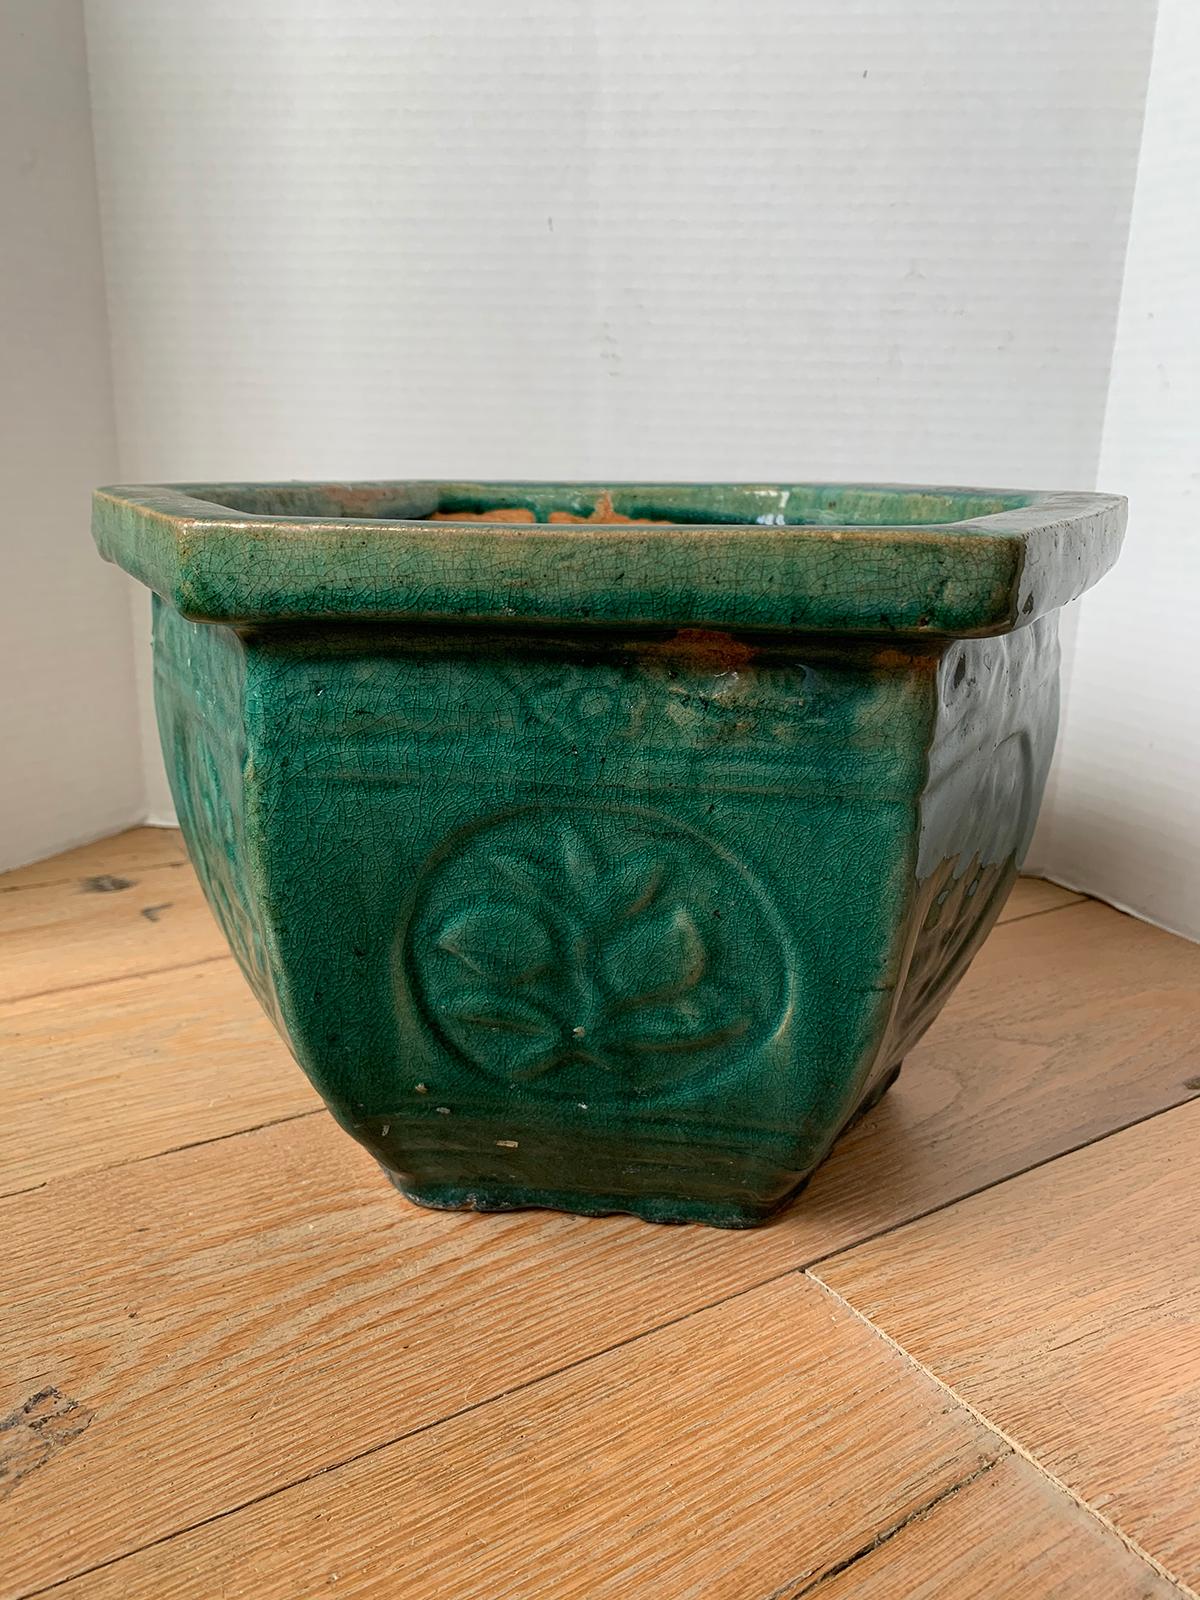 19th-20th century Chinese turquoise blue hexagonal pottery cachepot planter, unmarked.